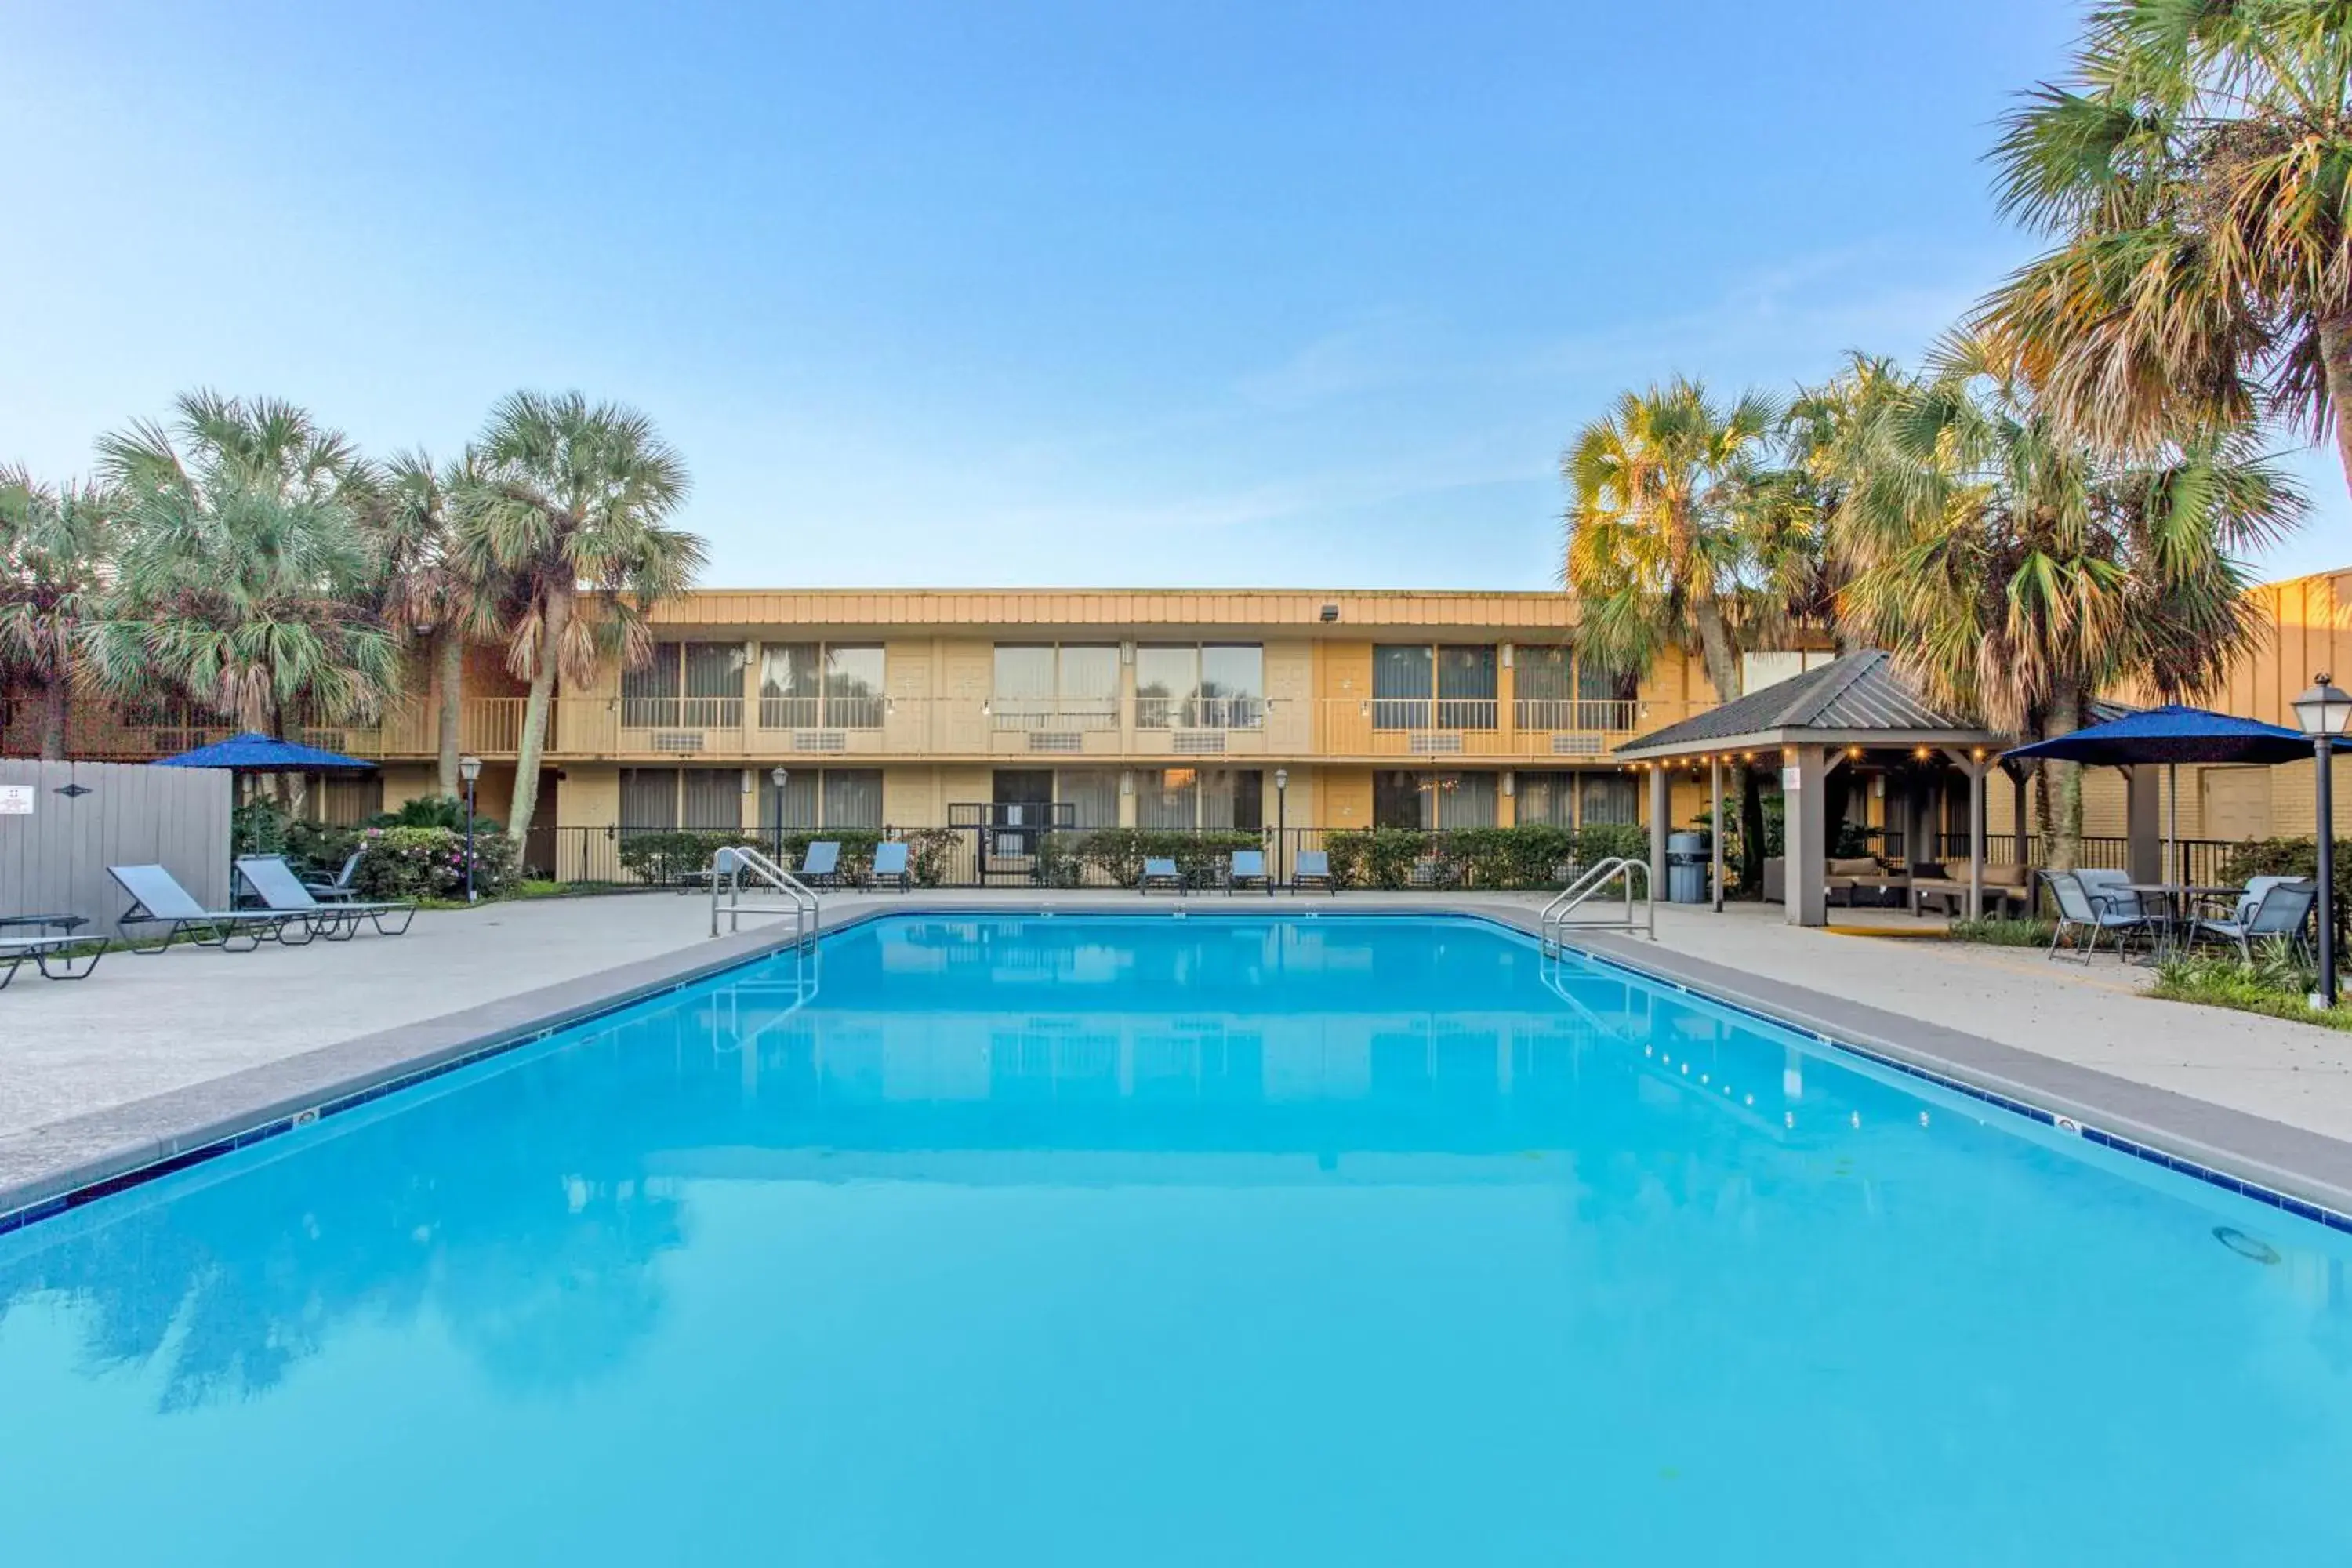 Property building, Swimming Pool in Quality Inn Slidell I-10